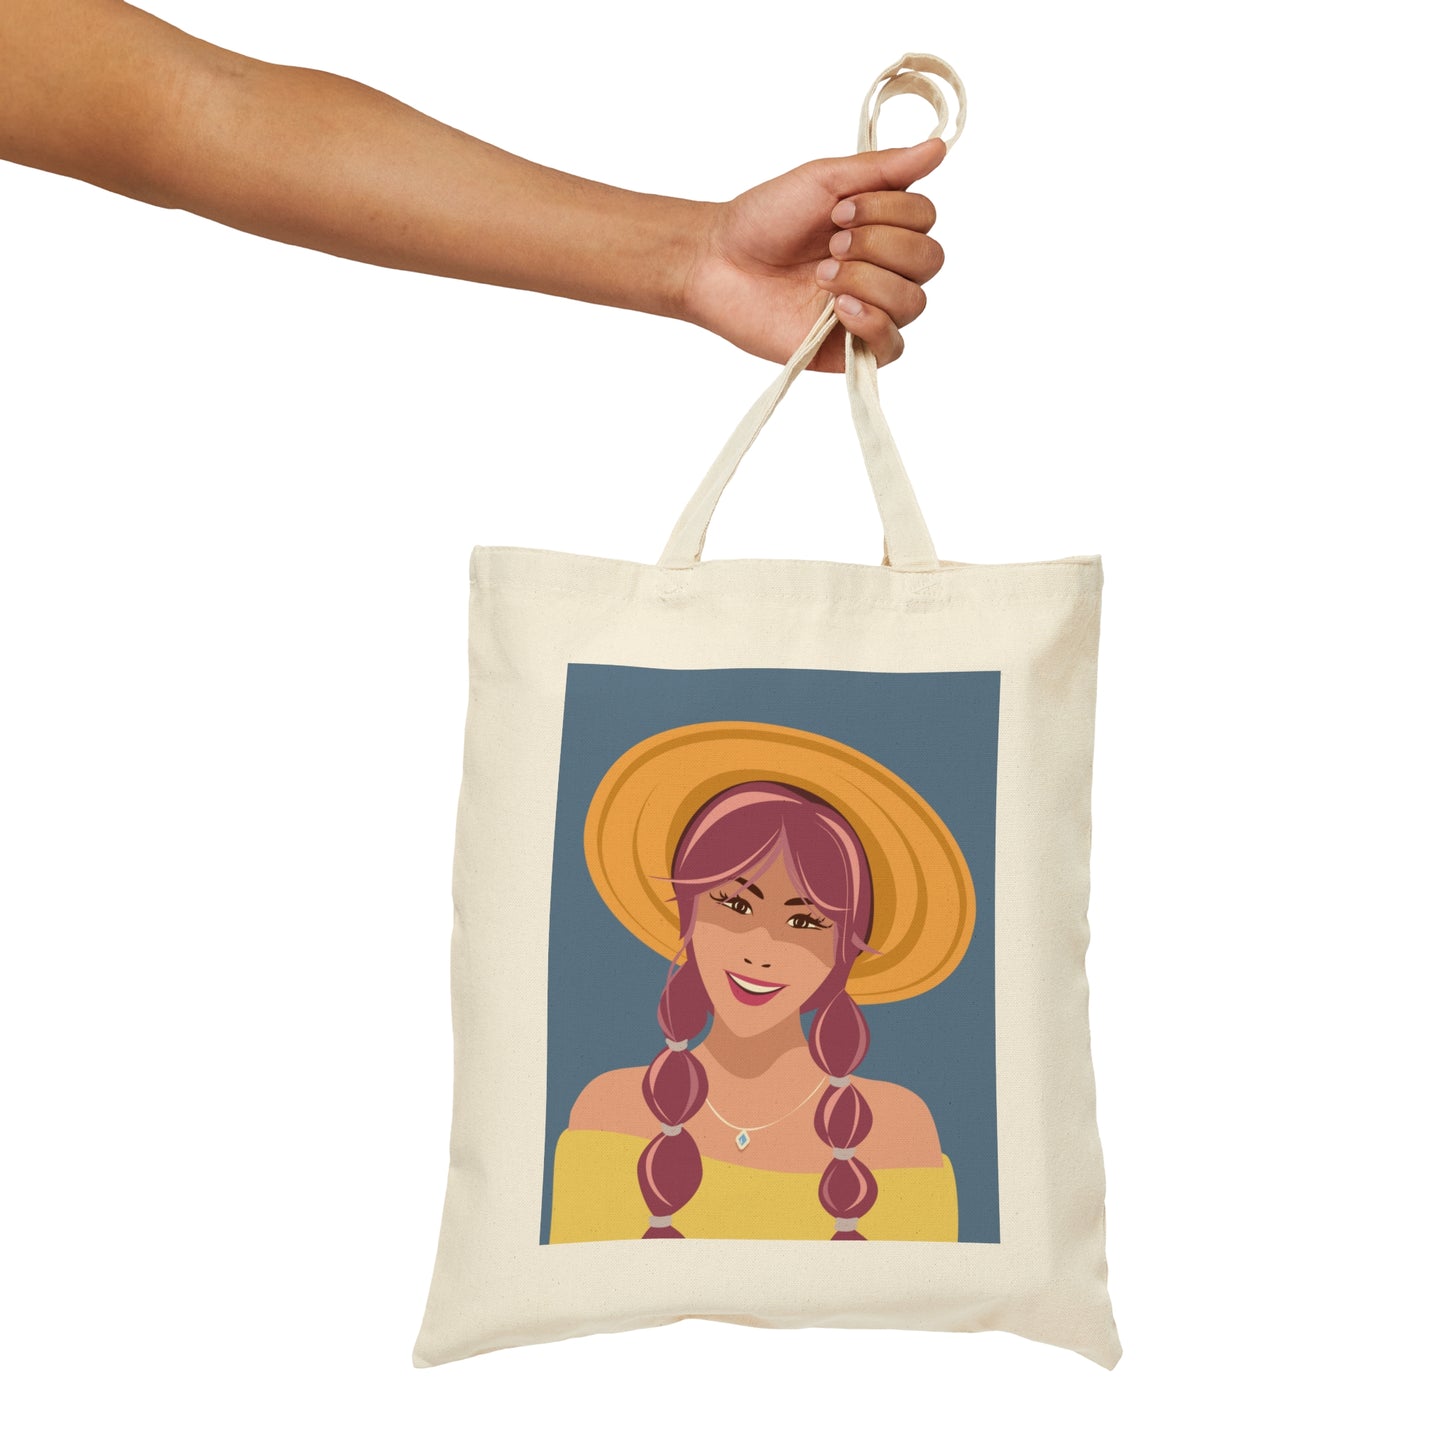 Happy Woman with Rose Hair Aesthetic Art Canvas Shopping Cotton Tote Bag